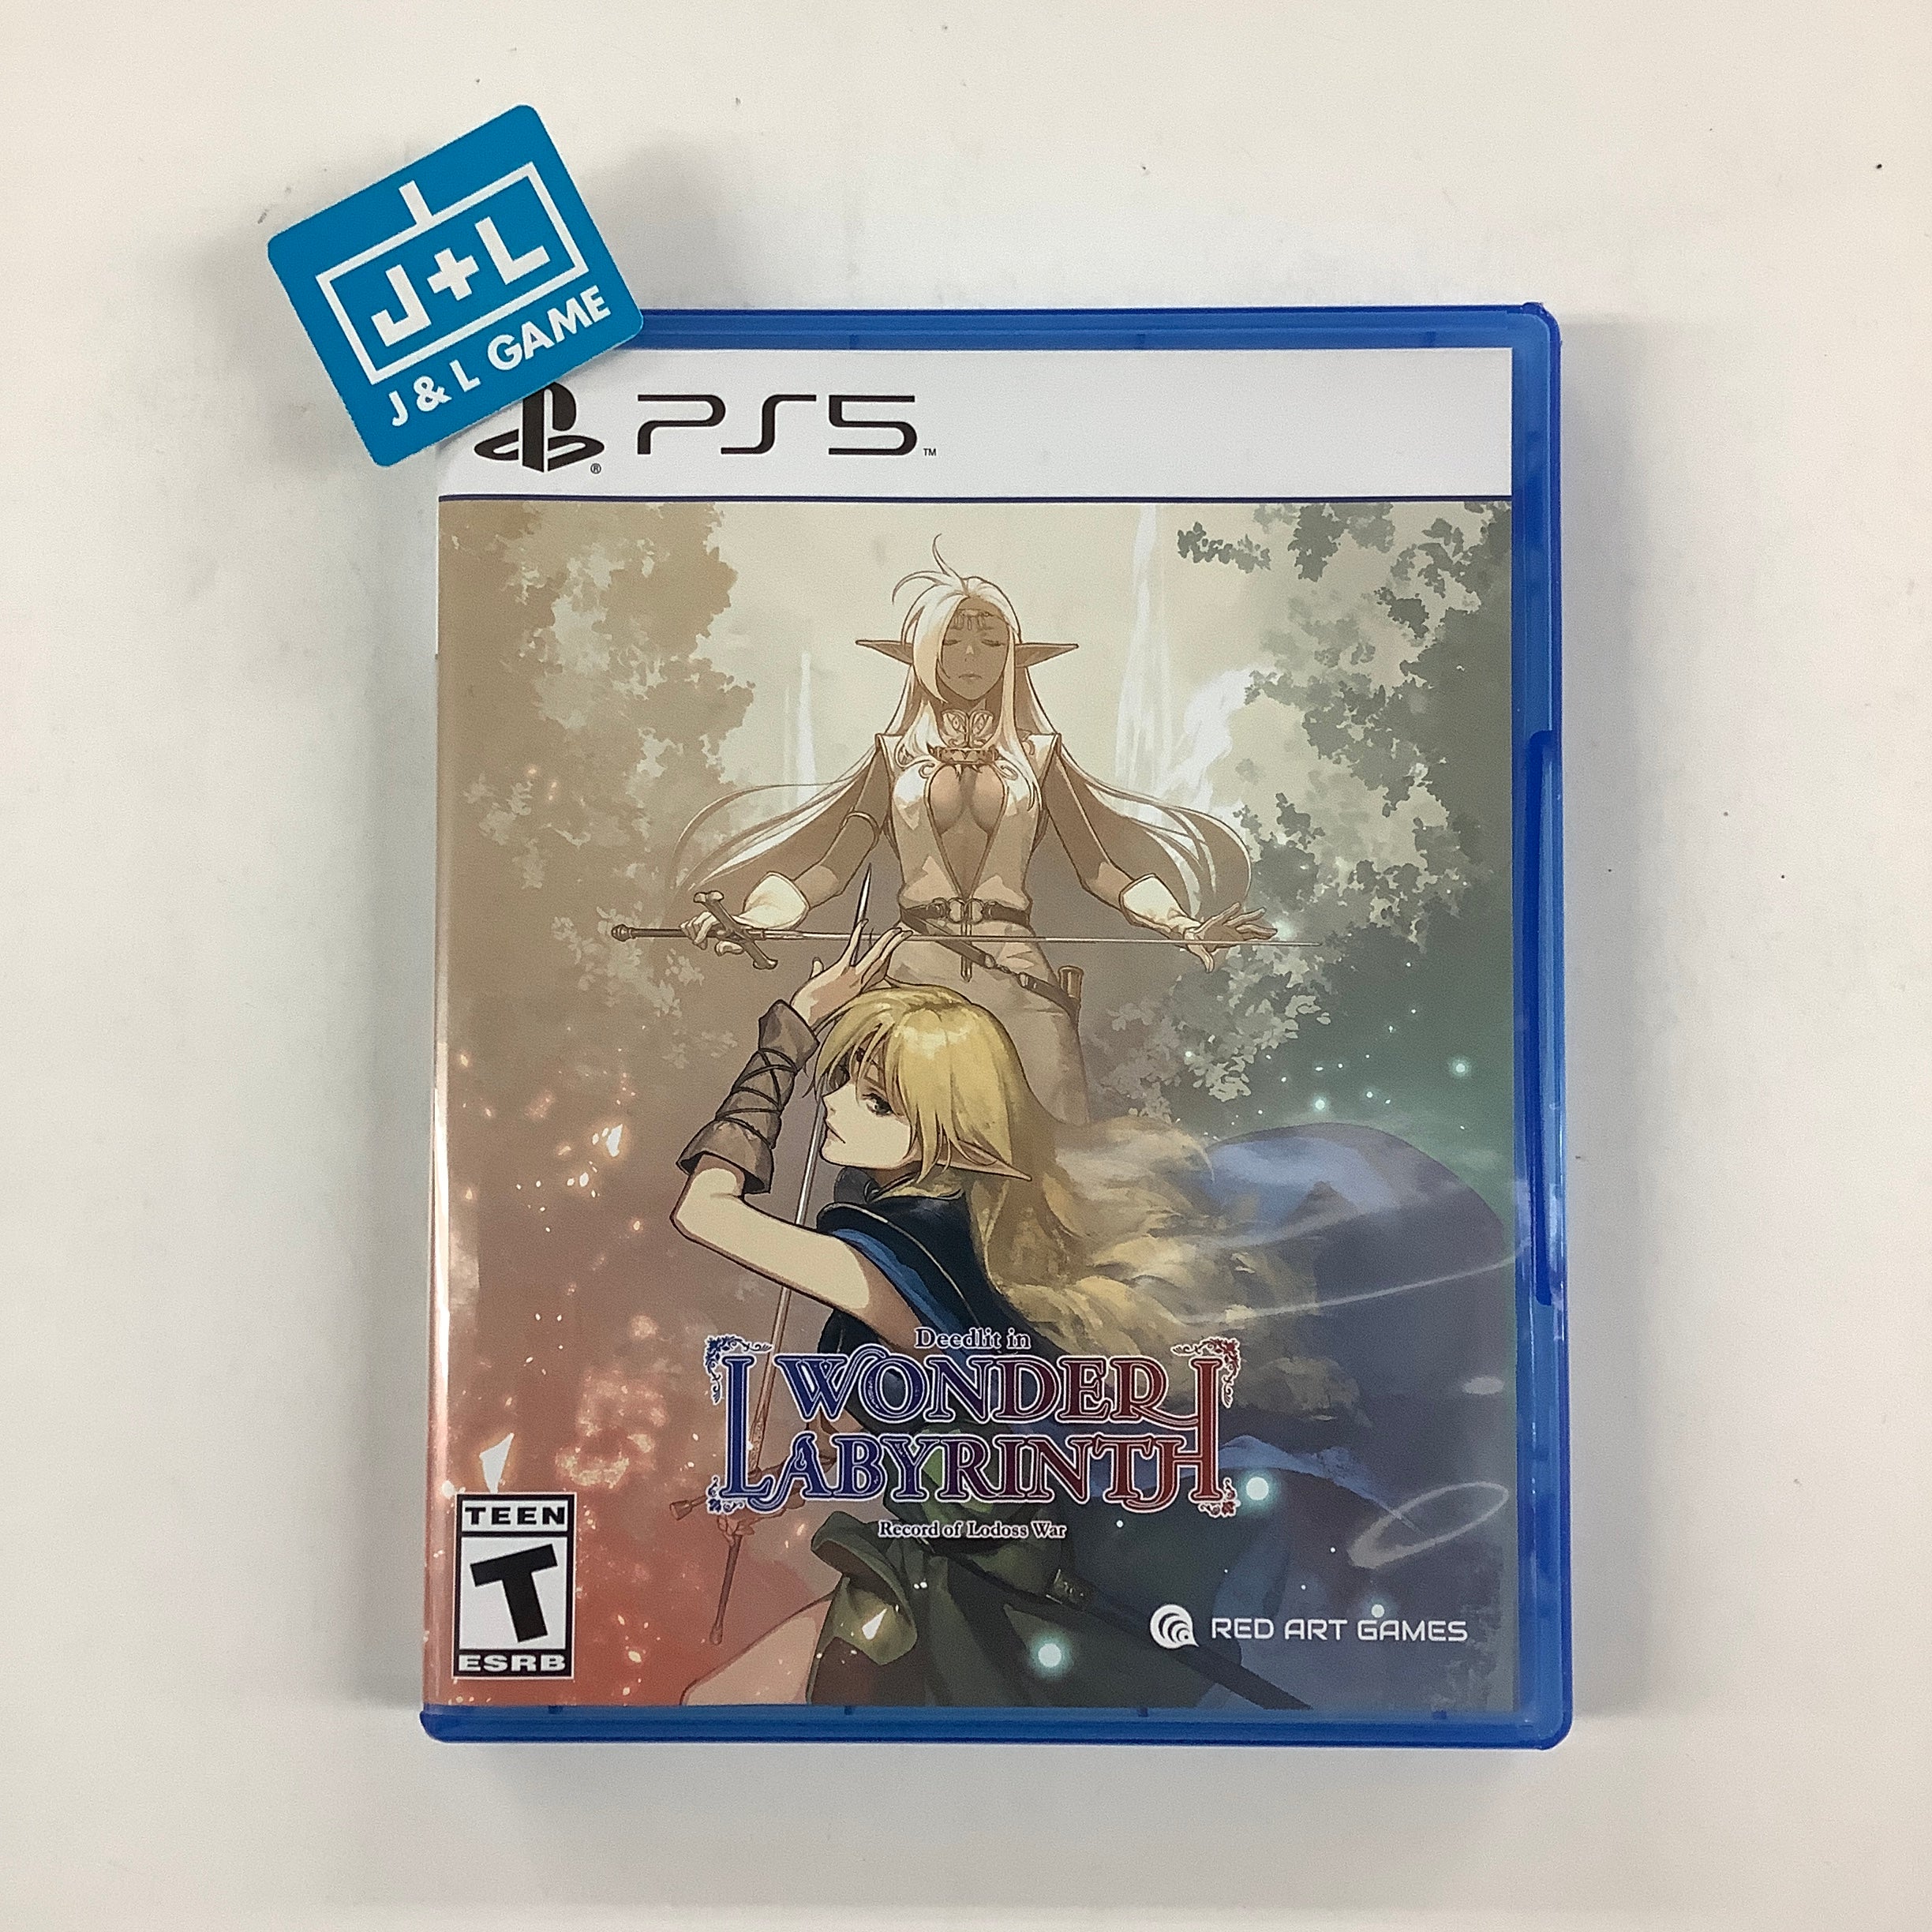 Record of Lodoss War: Deedlit in Wonder Labyrinth - (PS5) PlayStation 5 [UNBOXING] Video Games Red Art Games   